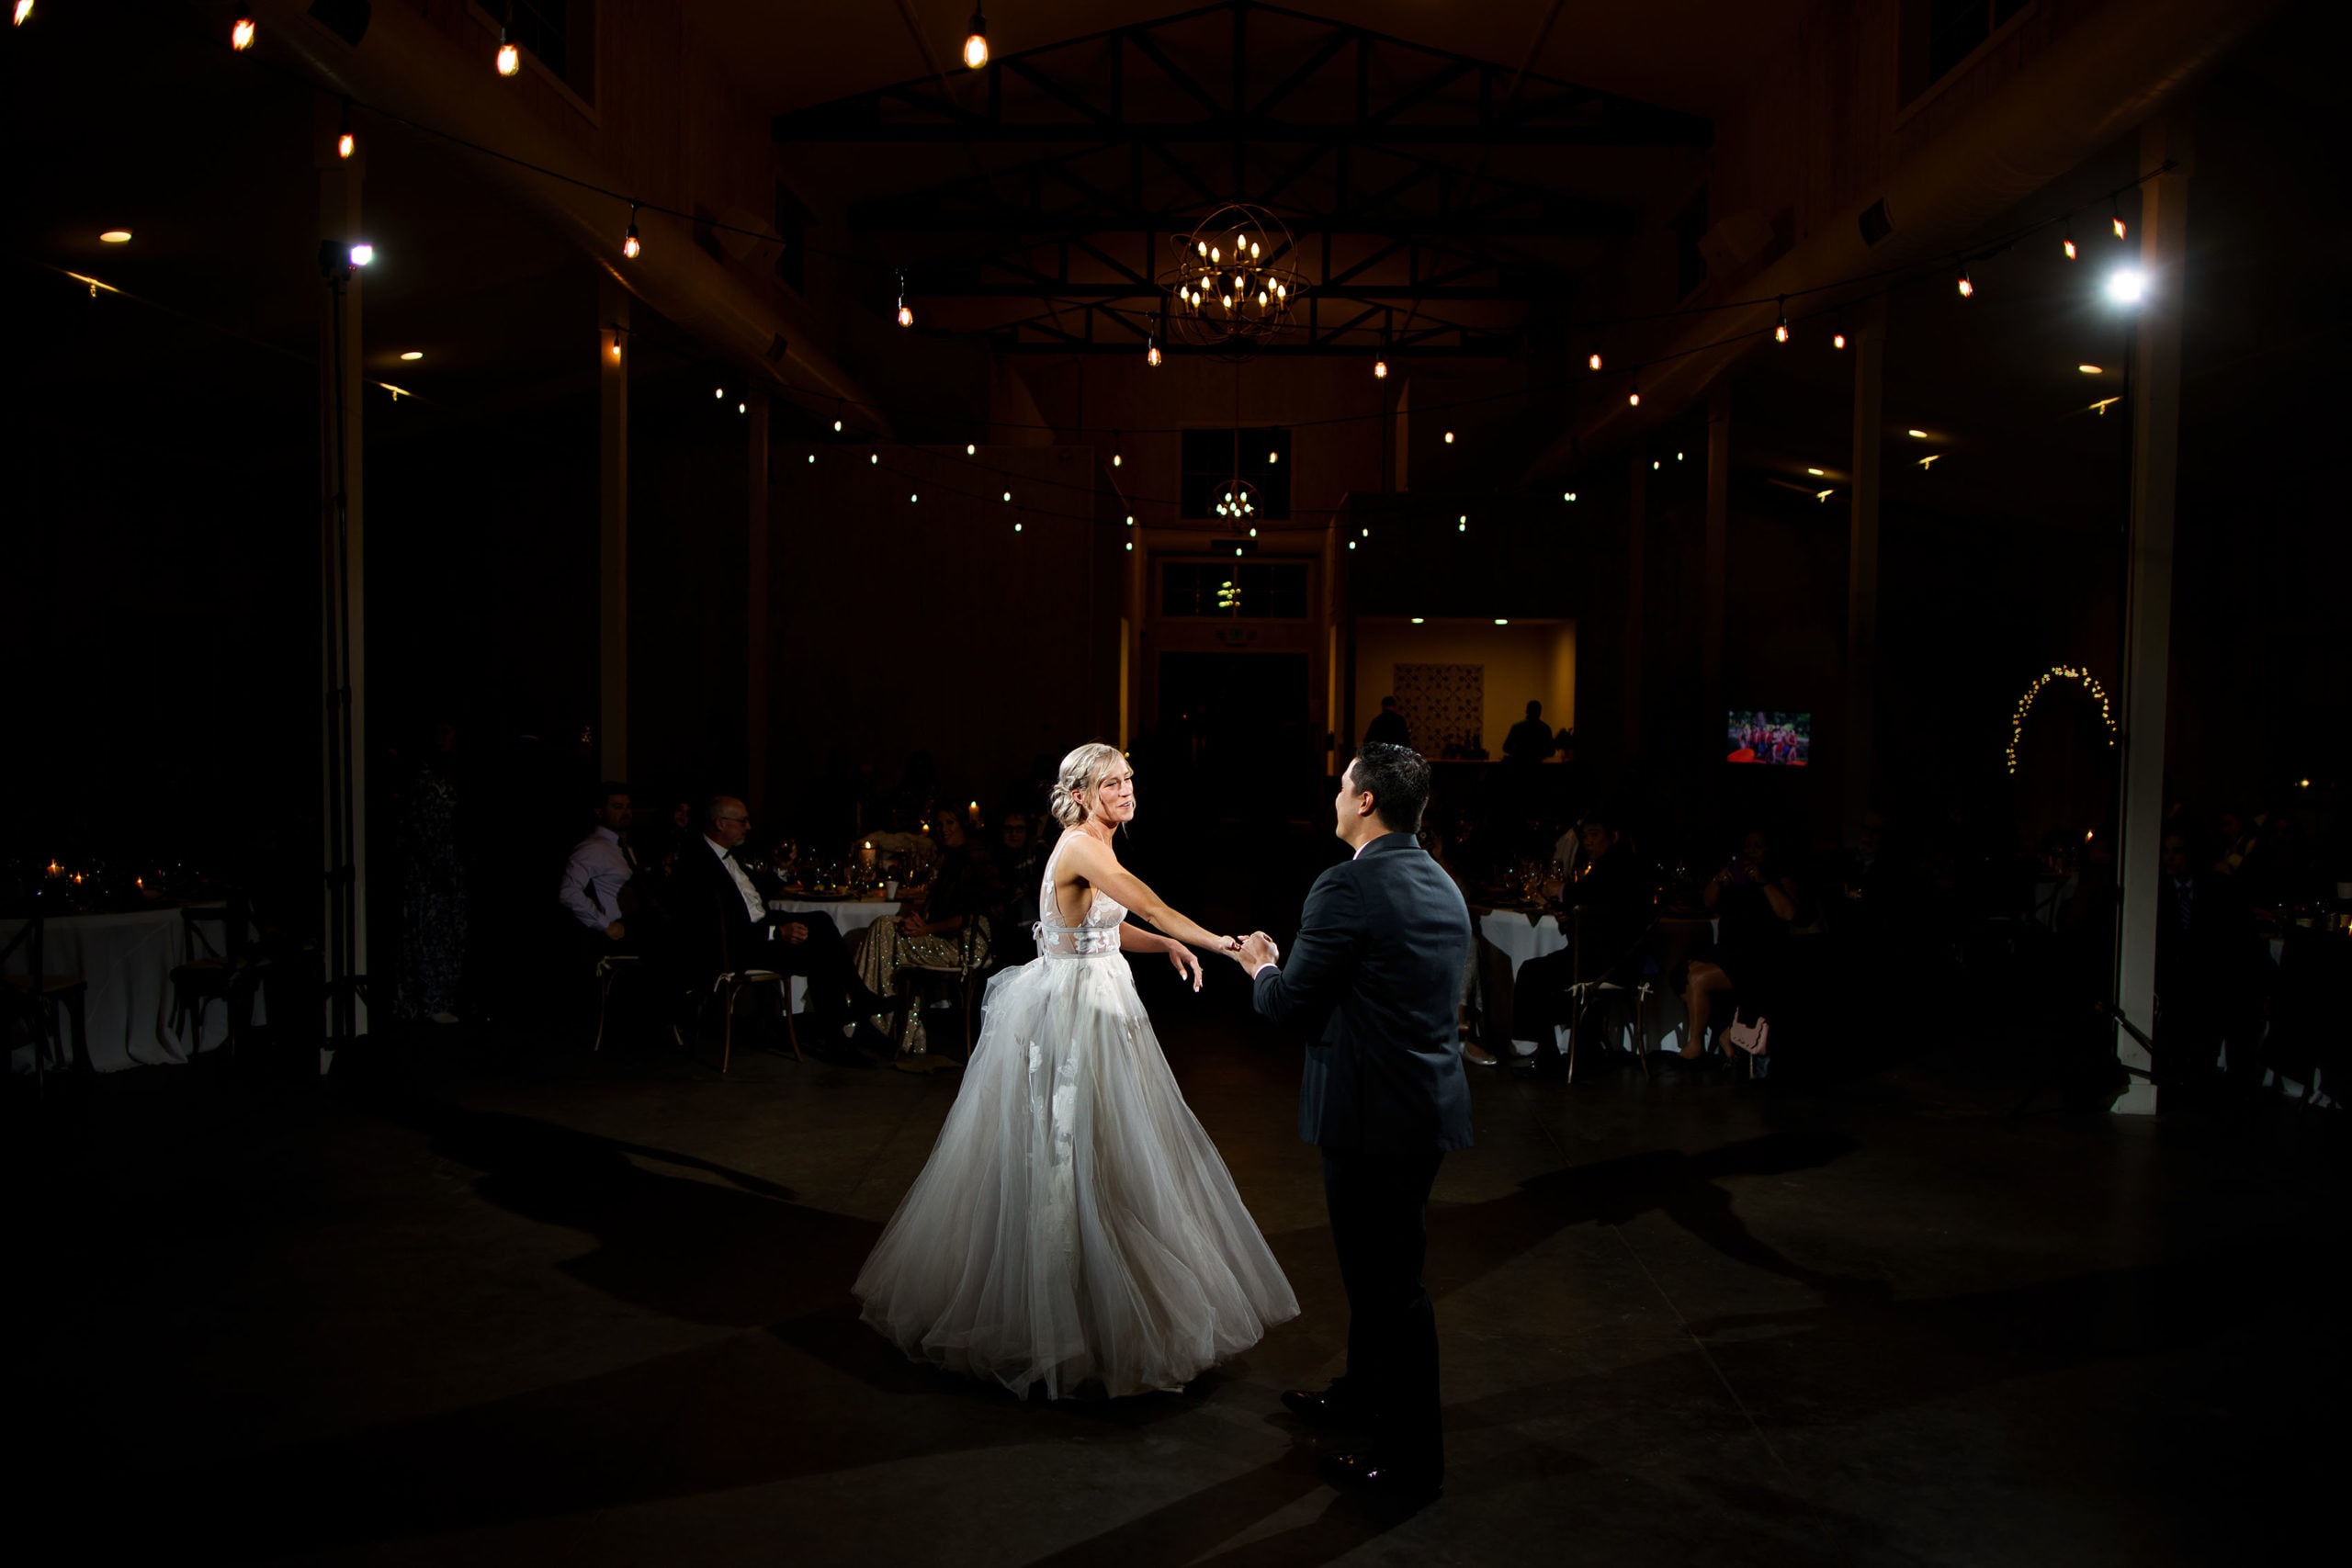 The newlyweds share their first dance at Woodlands in Morrison, Colorado